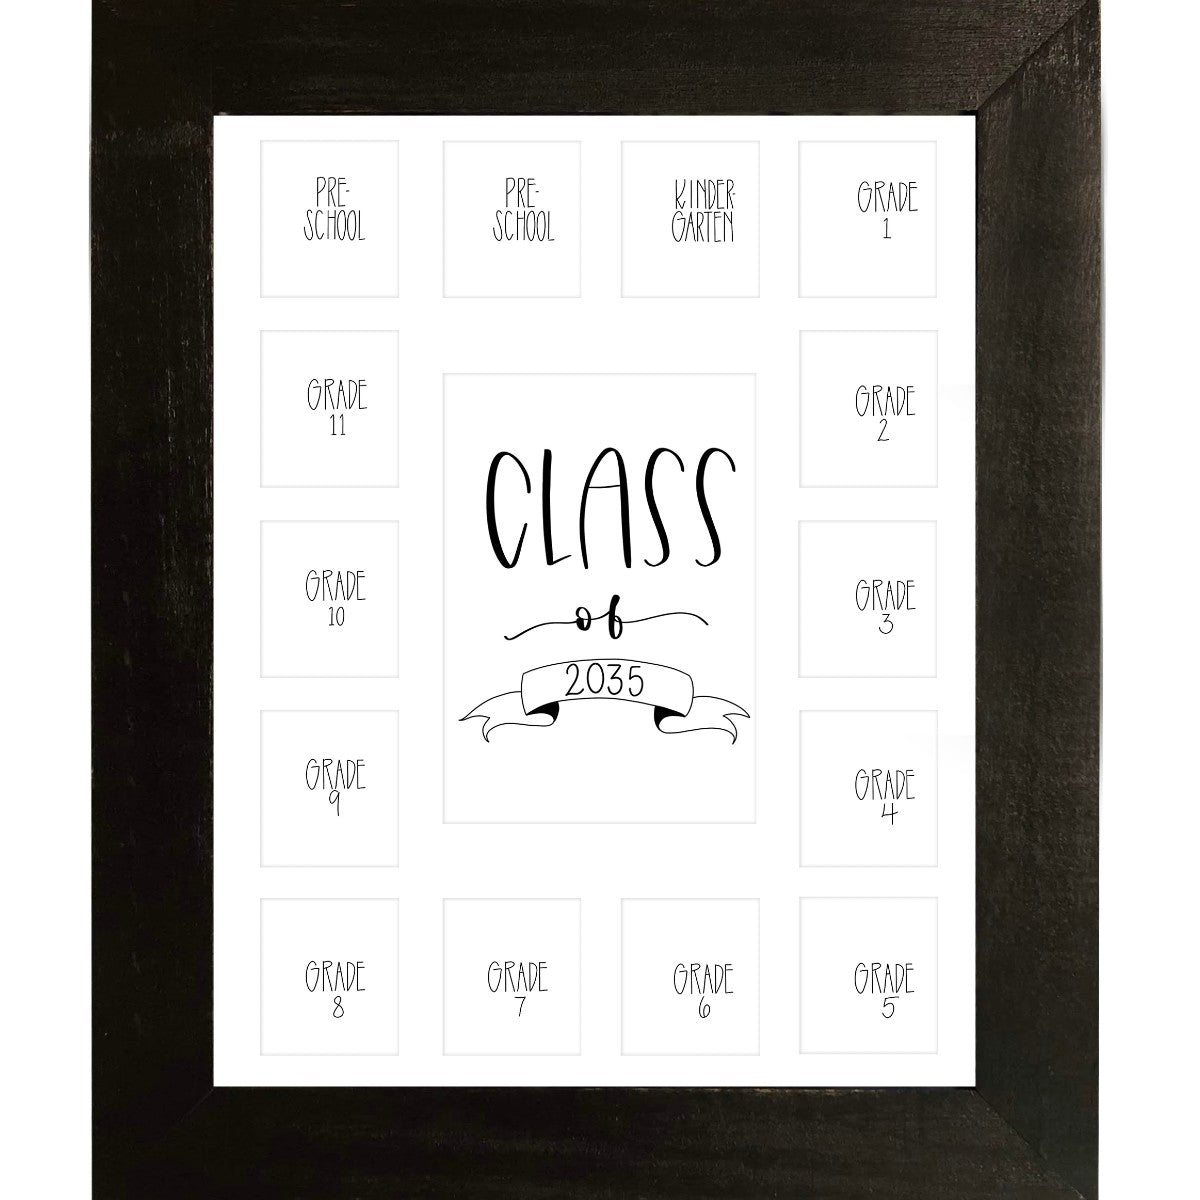 Black wood frame white mat school pictures